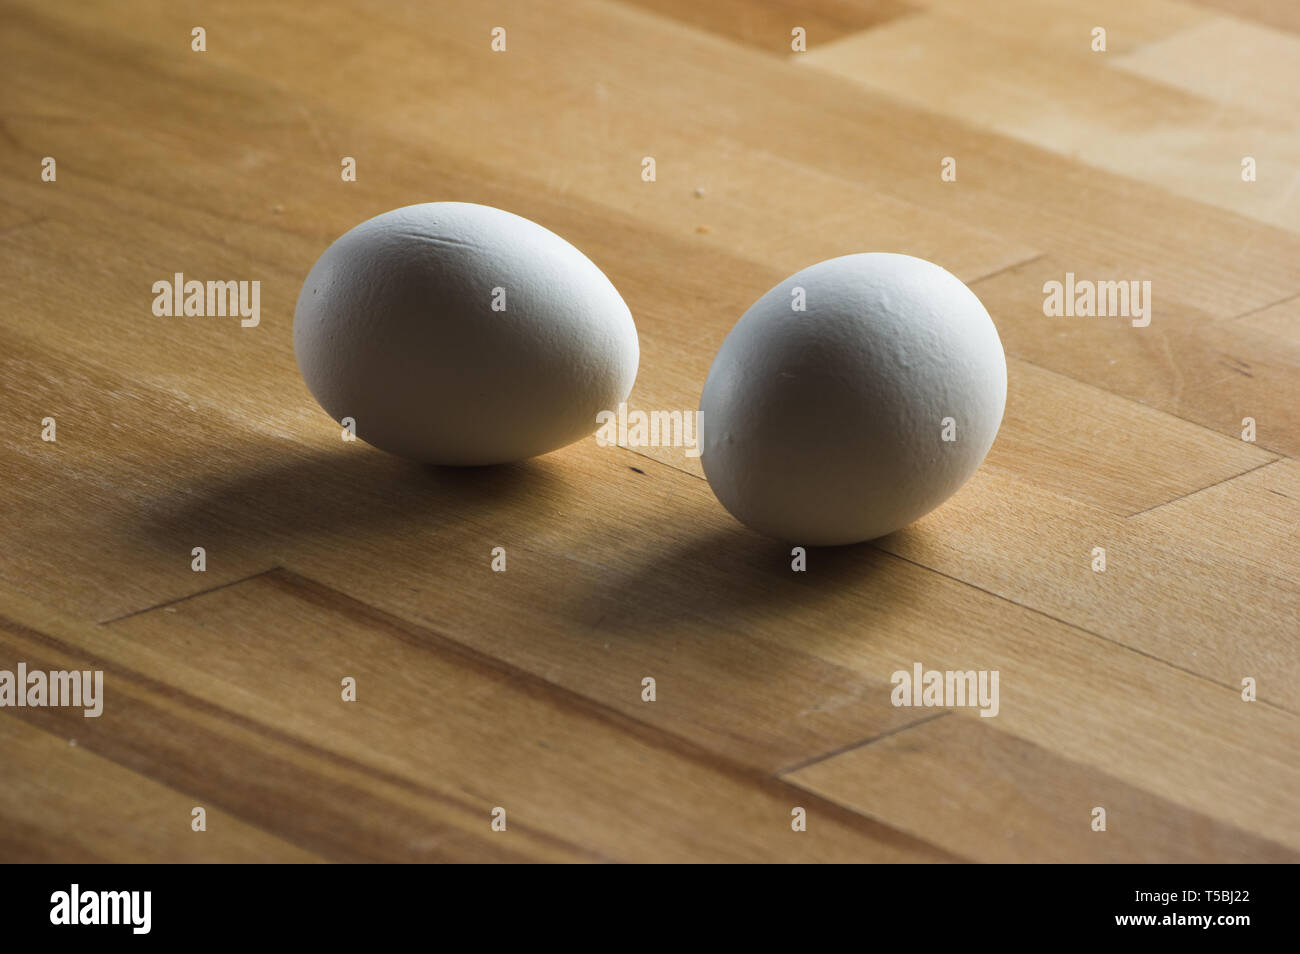 two white eggs laying on a wooden kitchen worktop Stock Photo